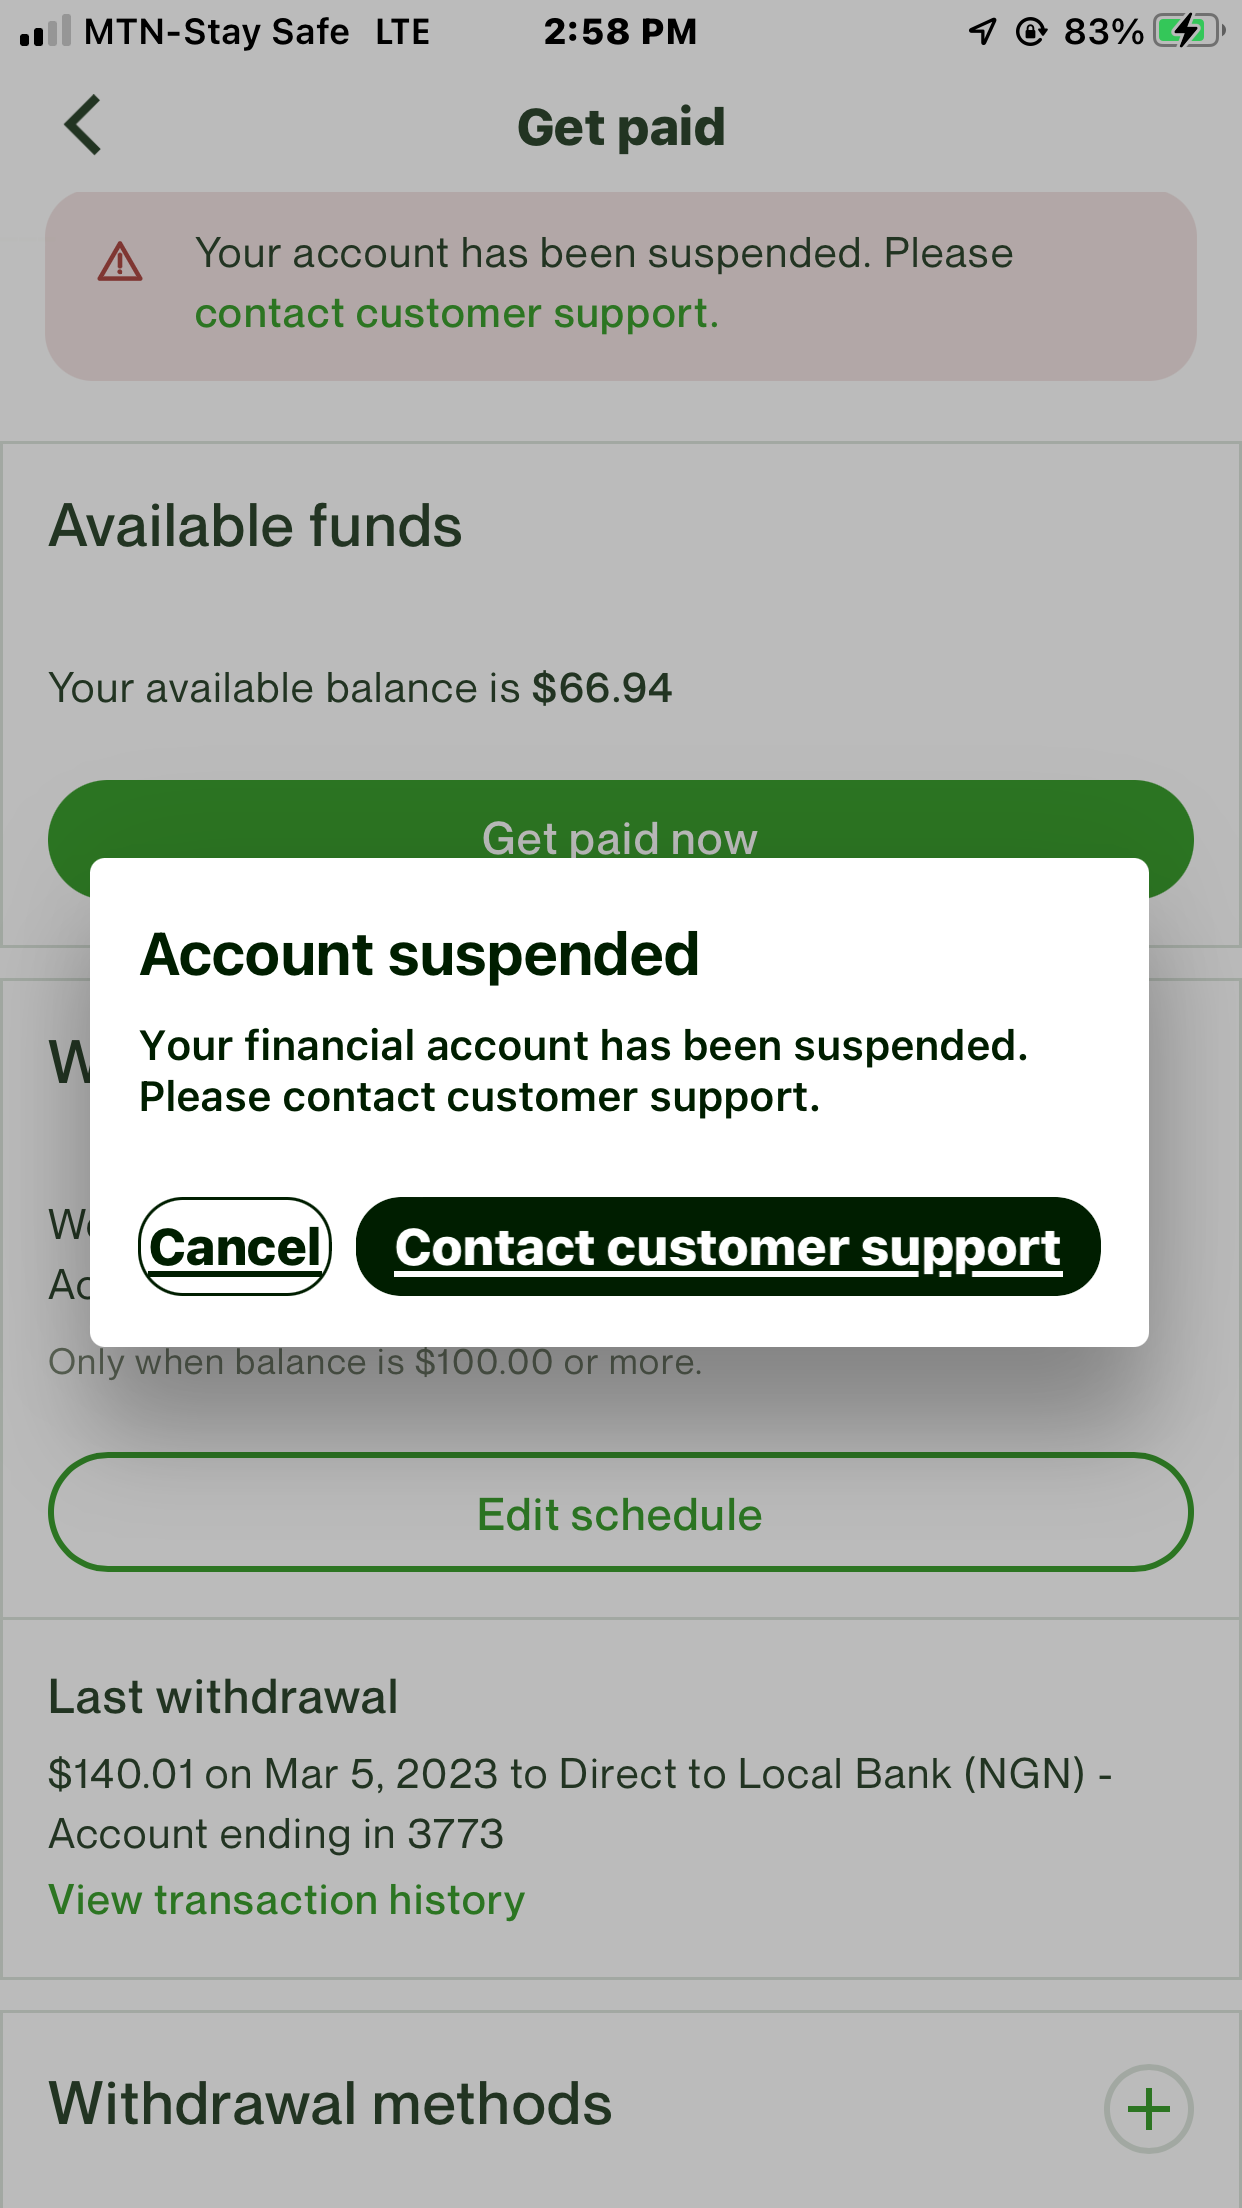 I NEED HELP WITH ACCOUNT SUSPENSION - Upwork Community